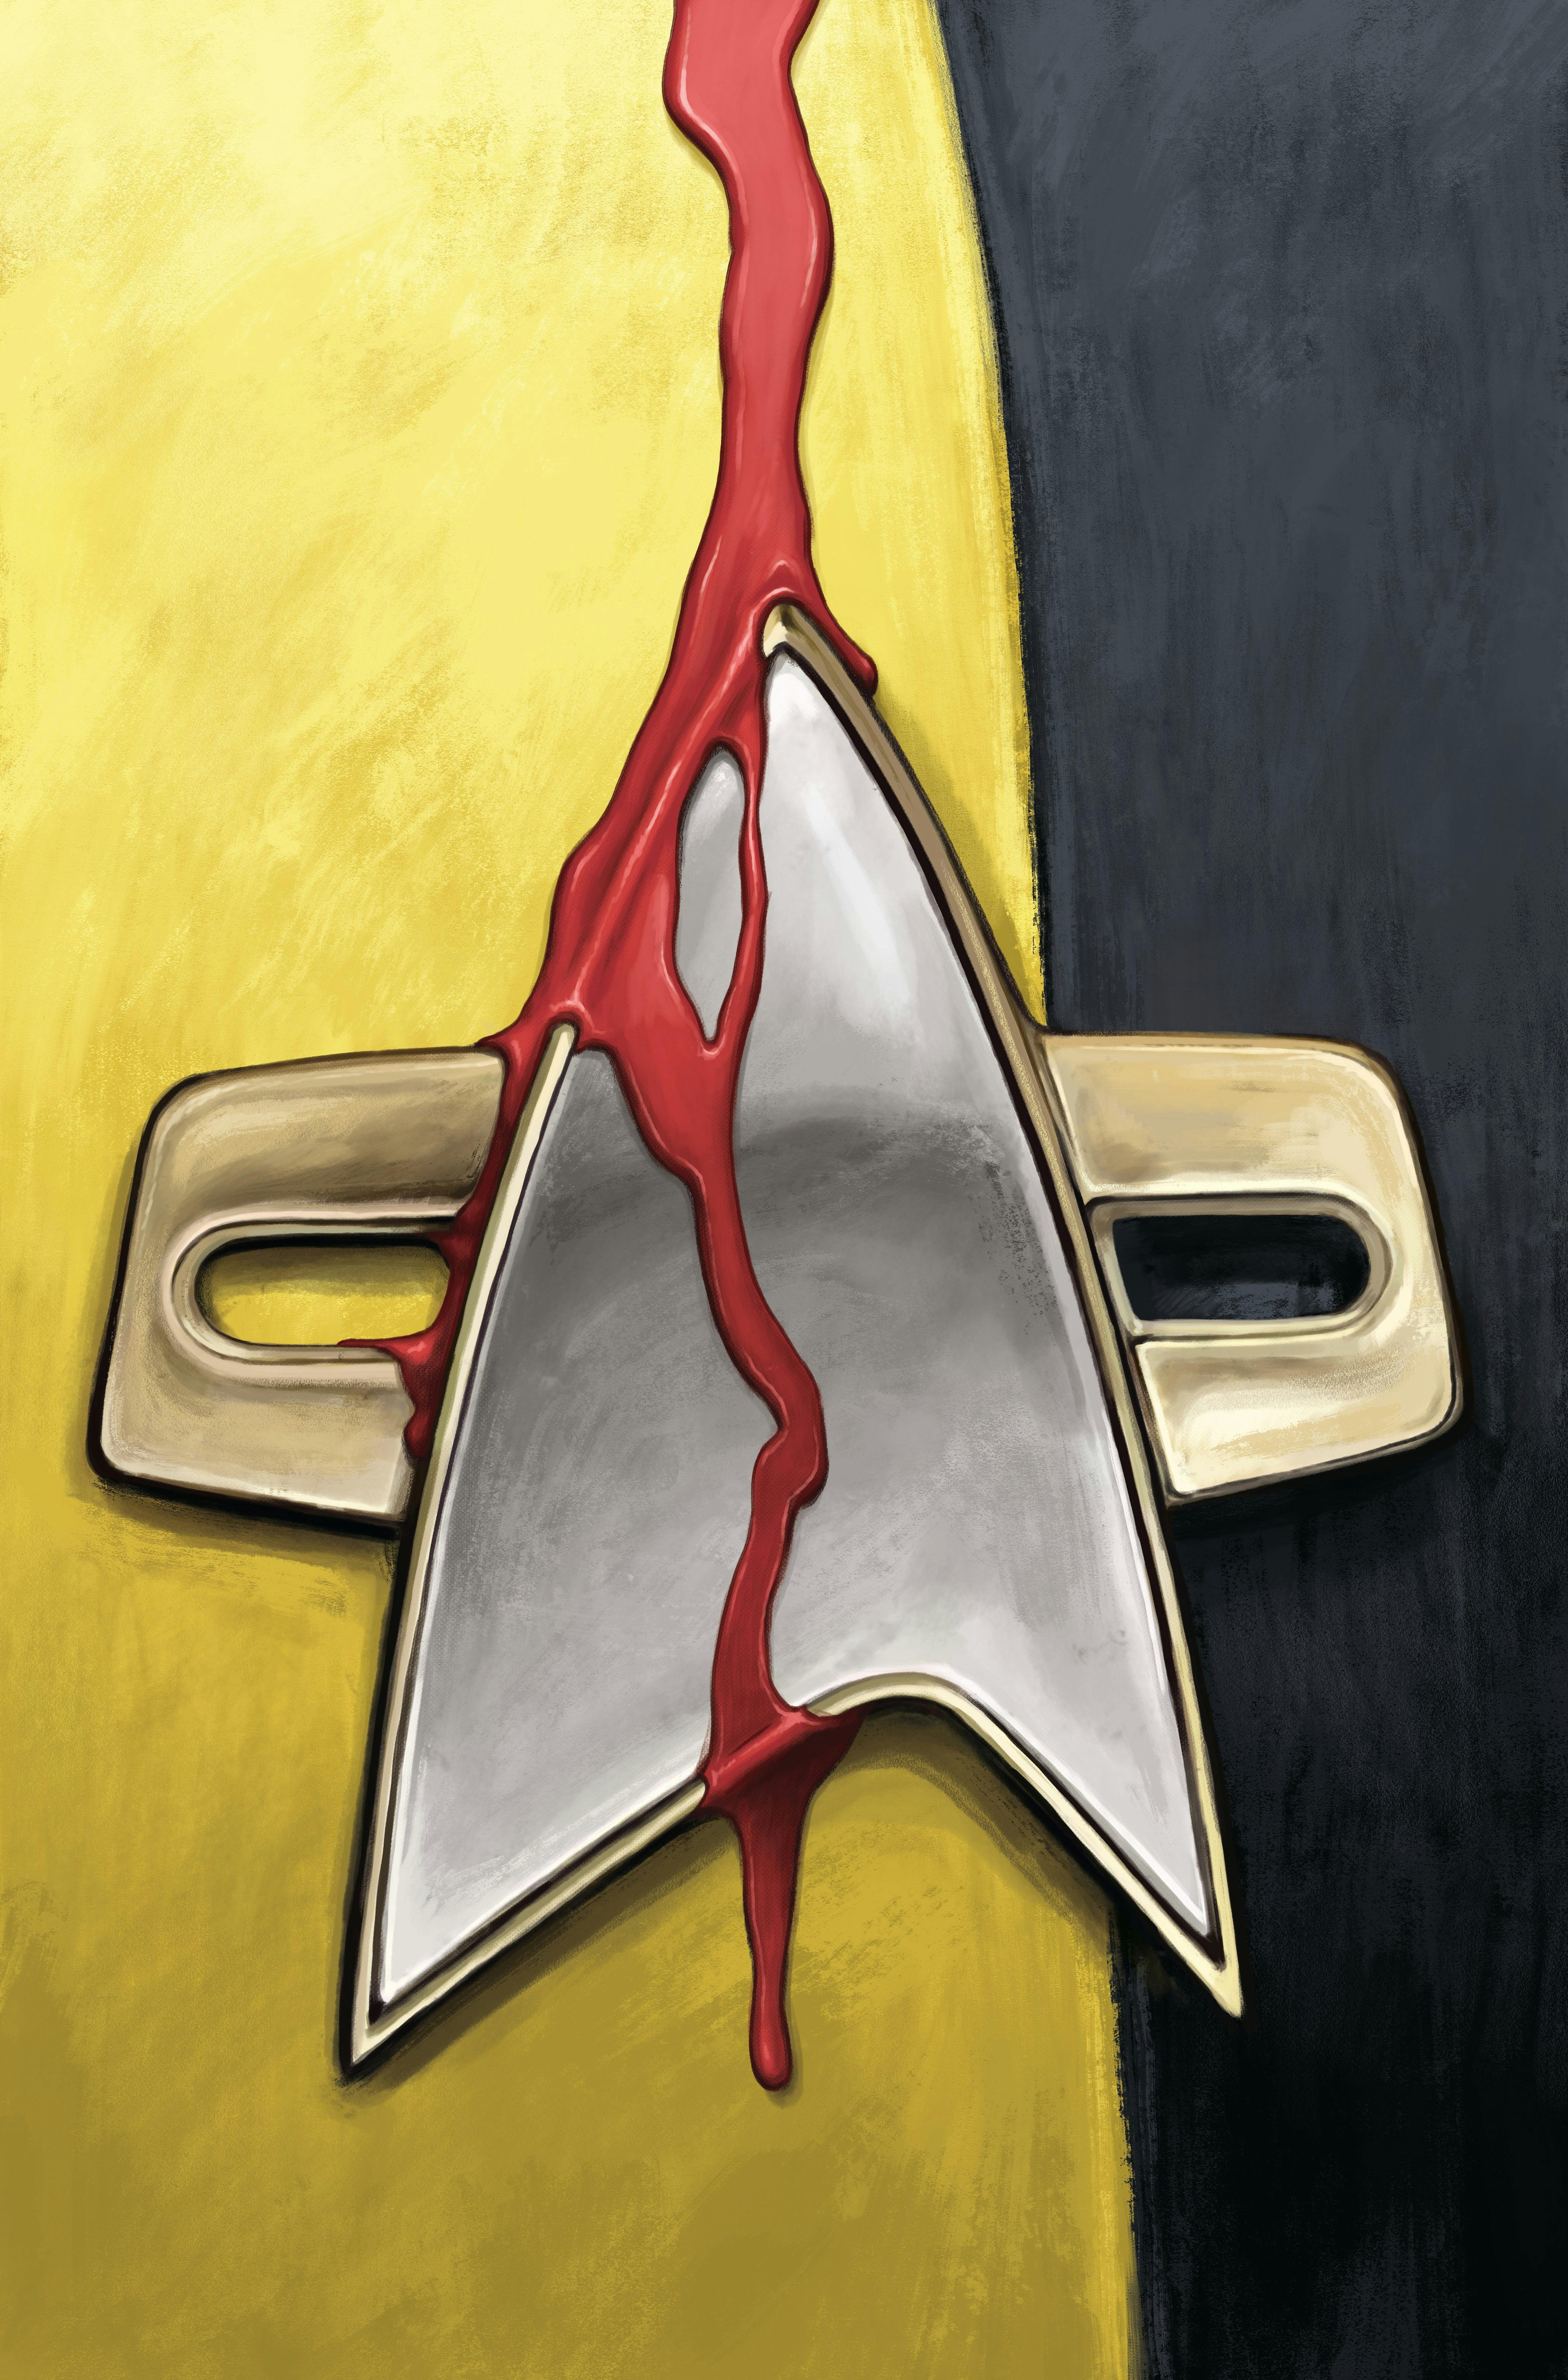 STAR TREK: DAY OF BLOOD Free Comic Book Day Special cover art by Malachi Ward